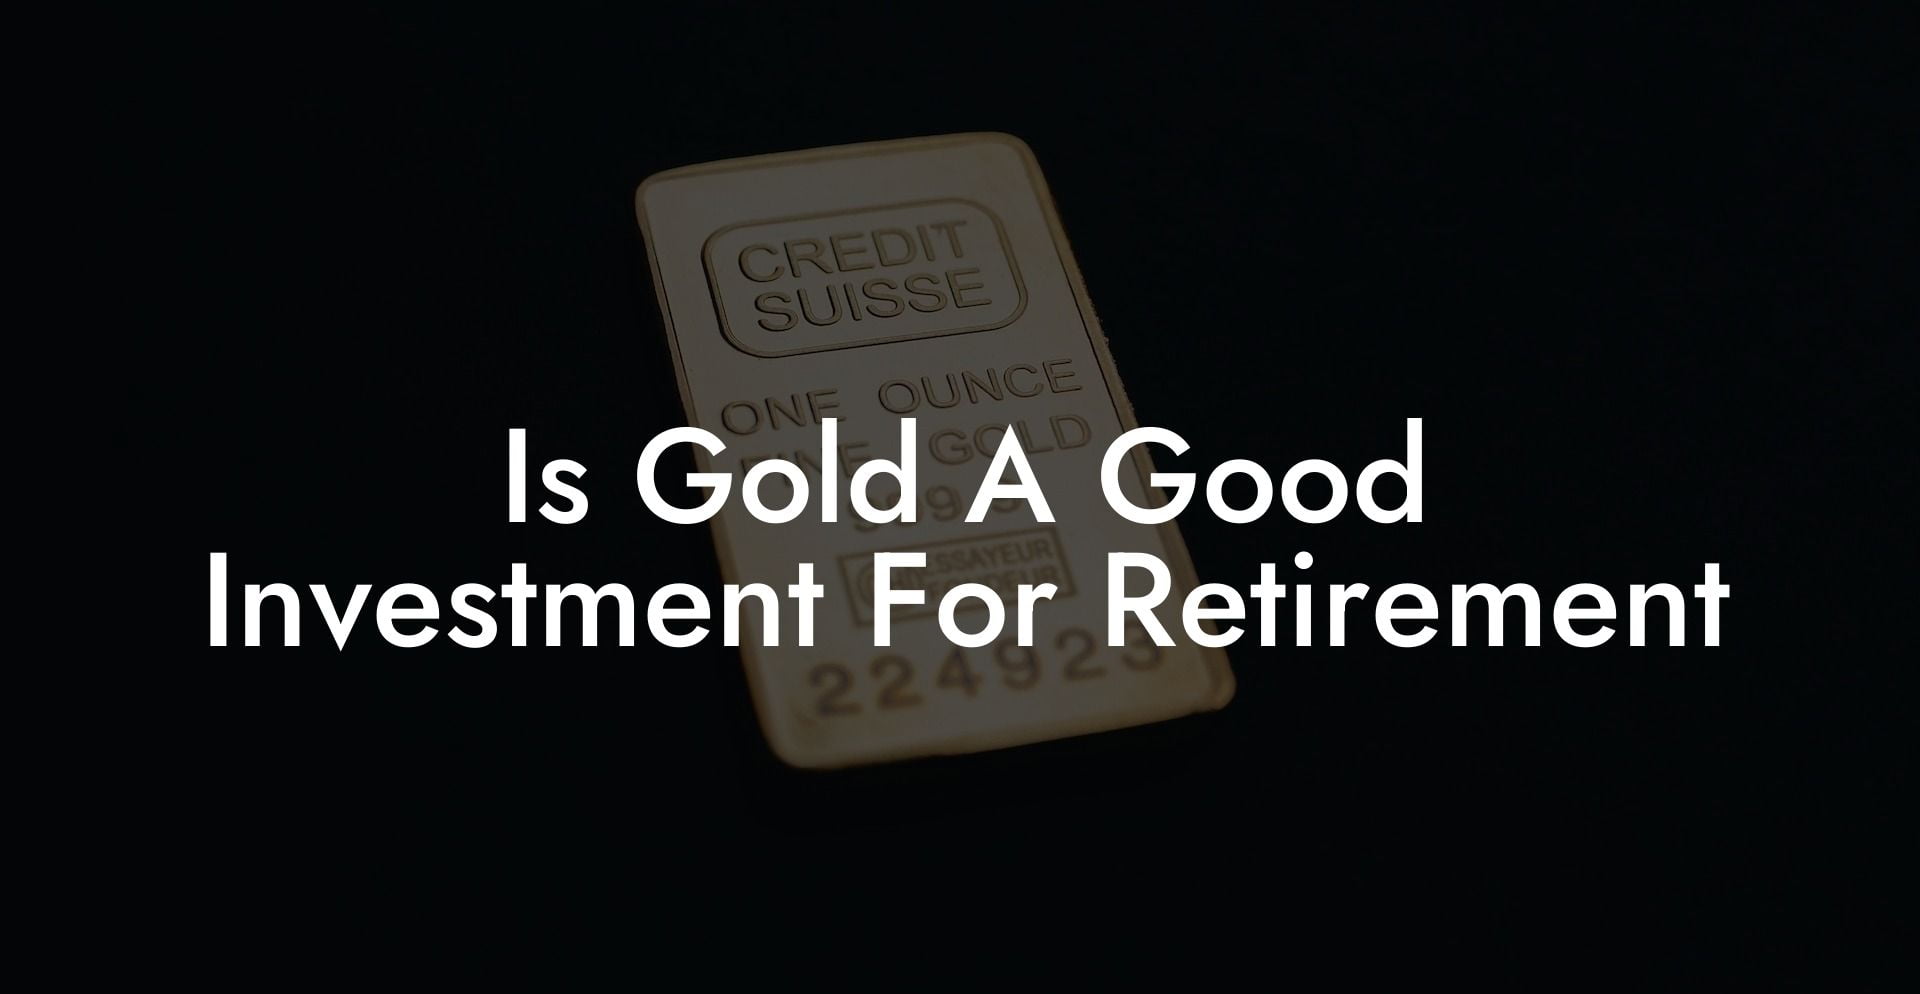 Is Gold A Good Investment For Retirement?